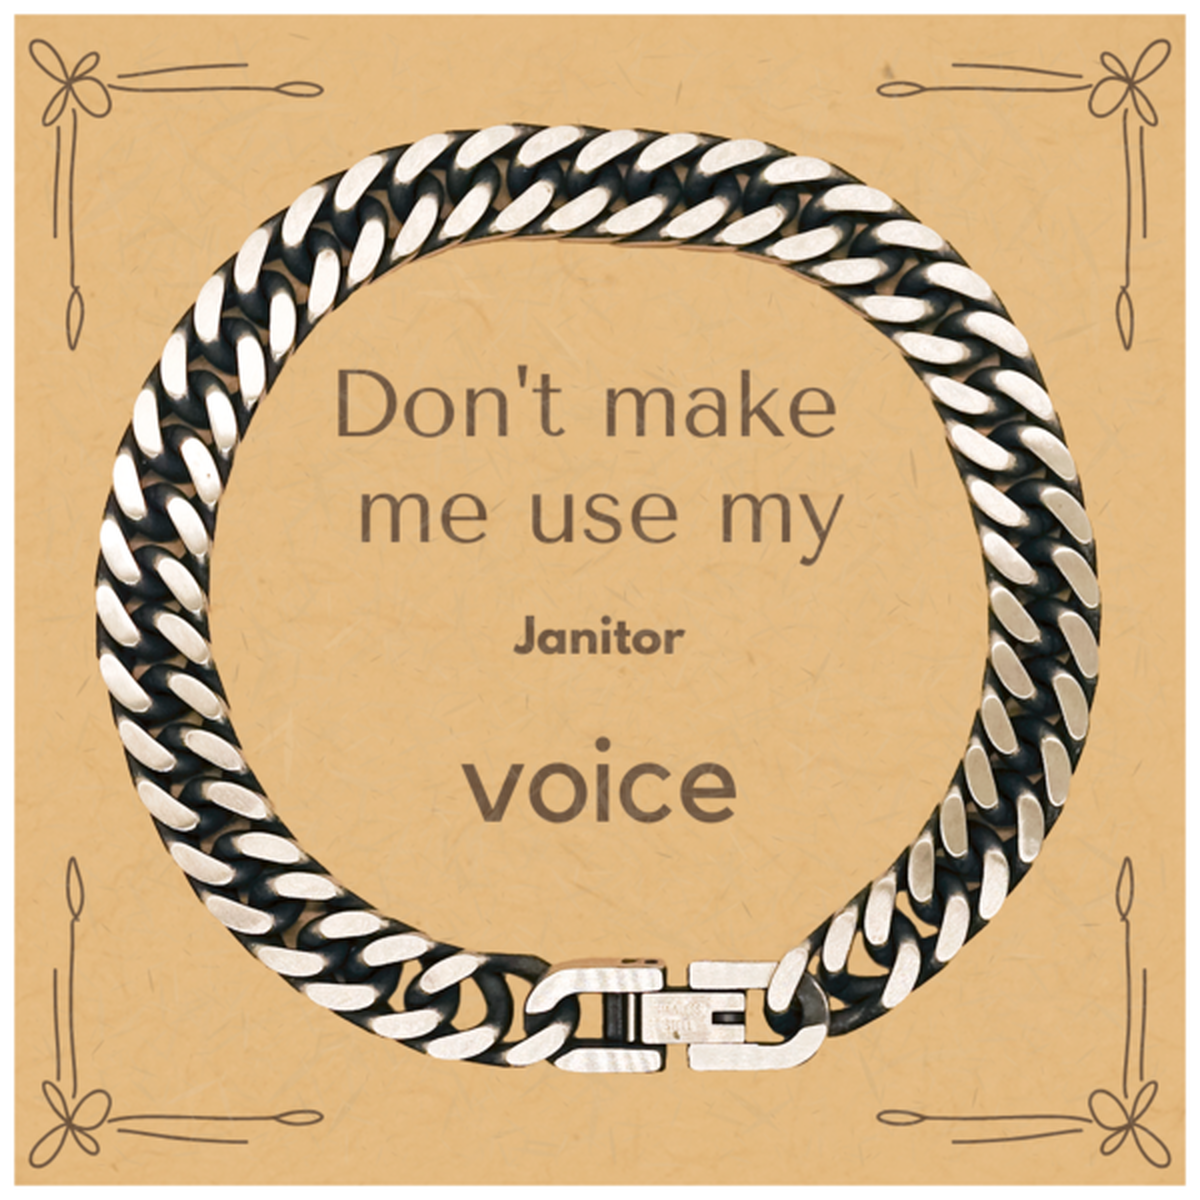 Don't make me use my Janitor voice, Sarcasm Janitor Card Gifts, Christmas Janitor Cuban Link Chain Bracelet Birthday Unique Gifts For Janitor Coworkers, Men, Women, Colleague, Friends